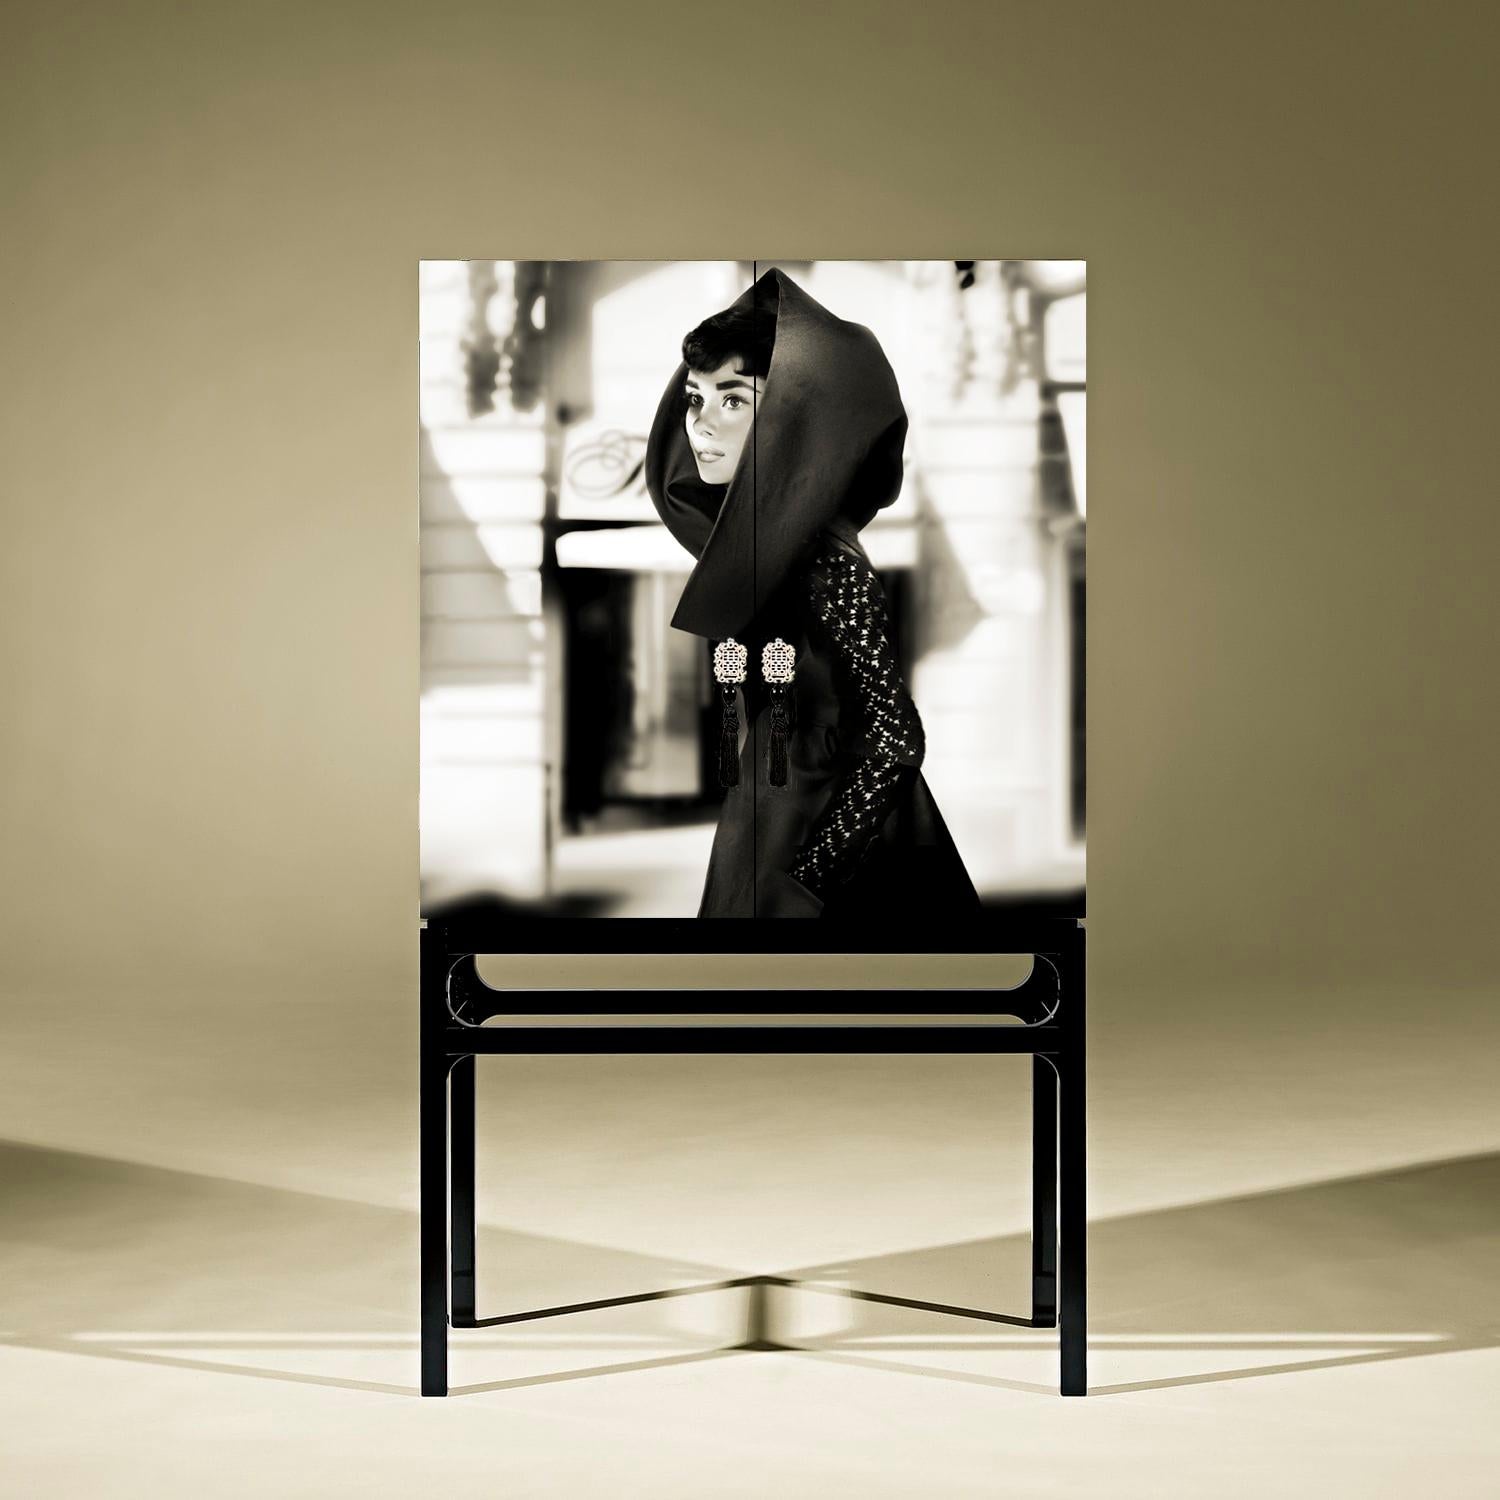 Contemporary Central Park South Audrey Hepburn Cabinet Artistic Intervention by Axel Crieger